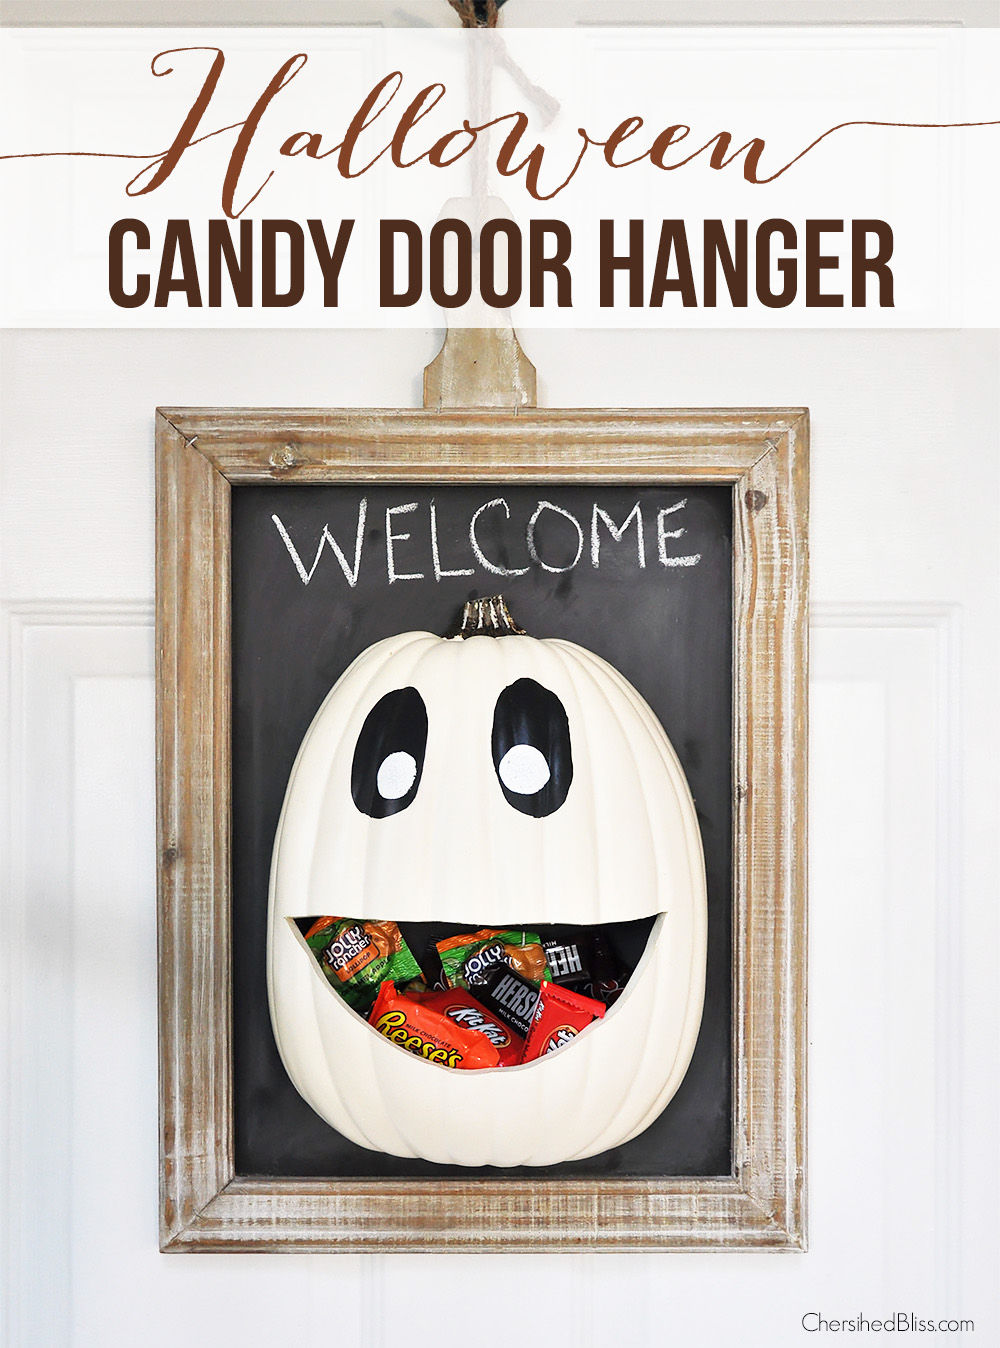 A door hanger with candy inside the pumpkin mouth.